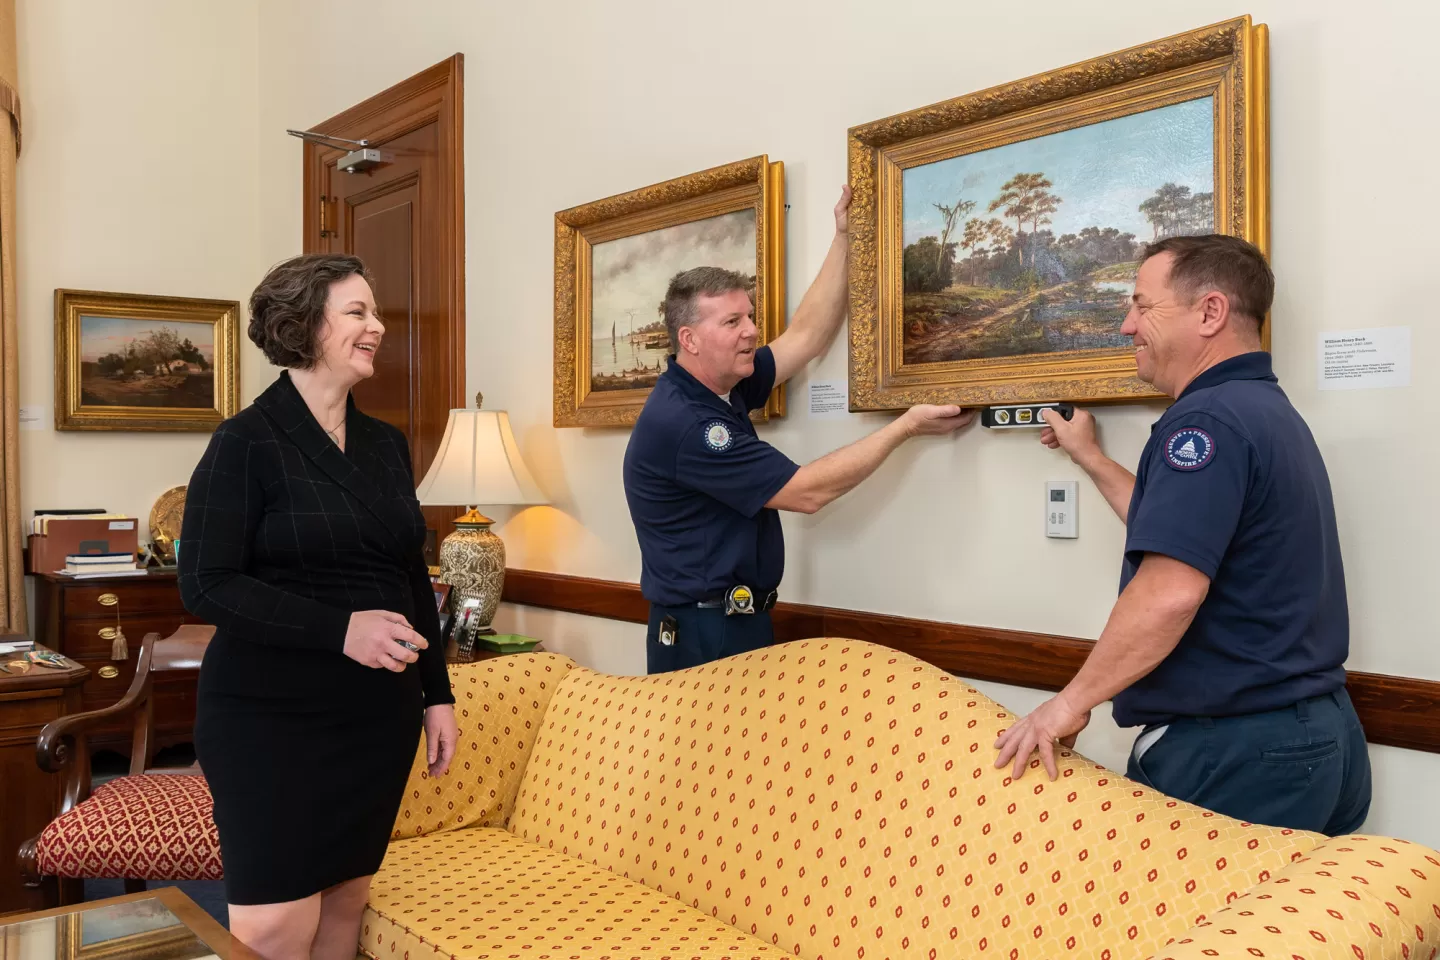 Senate Move Coordinator Bonnie Holod, who is also the supervisory architect in the Senate Office Buildings jurisdiction, works with Michael Gass and Paul Bosch, wood crafters with the Senate Wood Crafting Branch, to hang artwork in a senator's office.